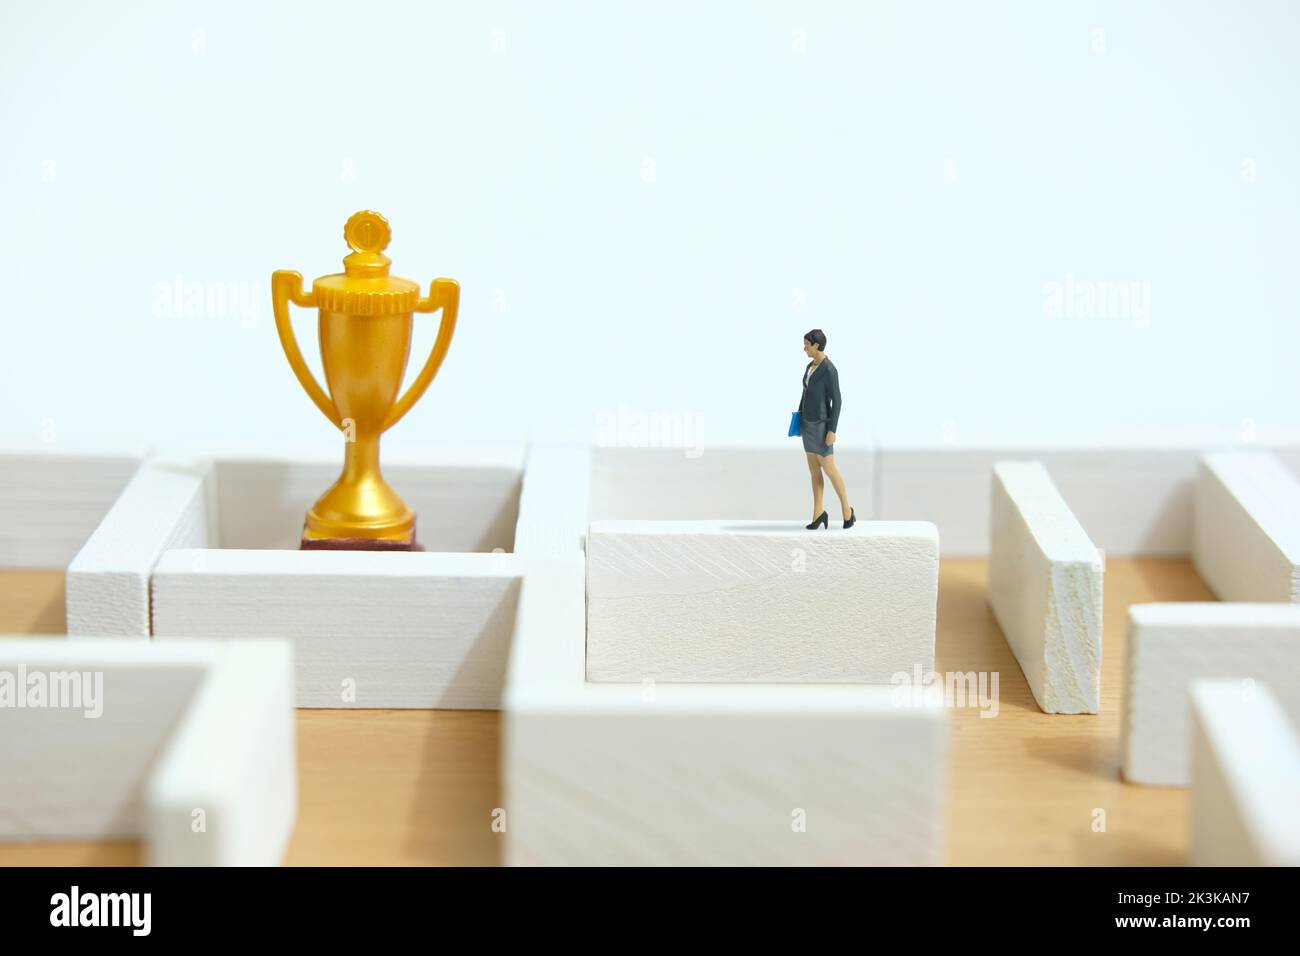 Miniature people toy figure photography. Business solution concept. A businesswoman walking above maze labyrinth wall looking for golden trophy, solut Stock Photo